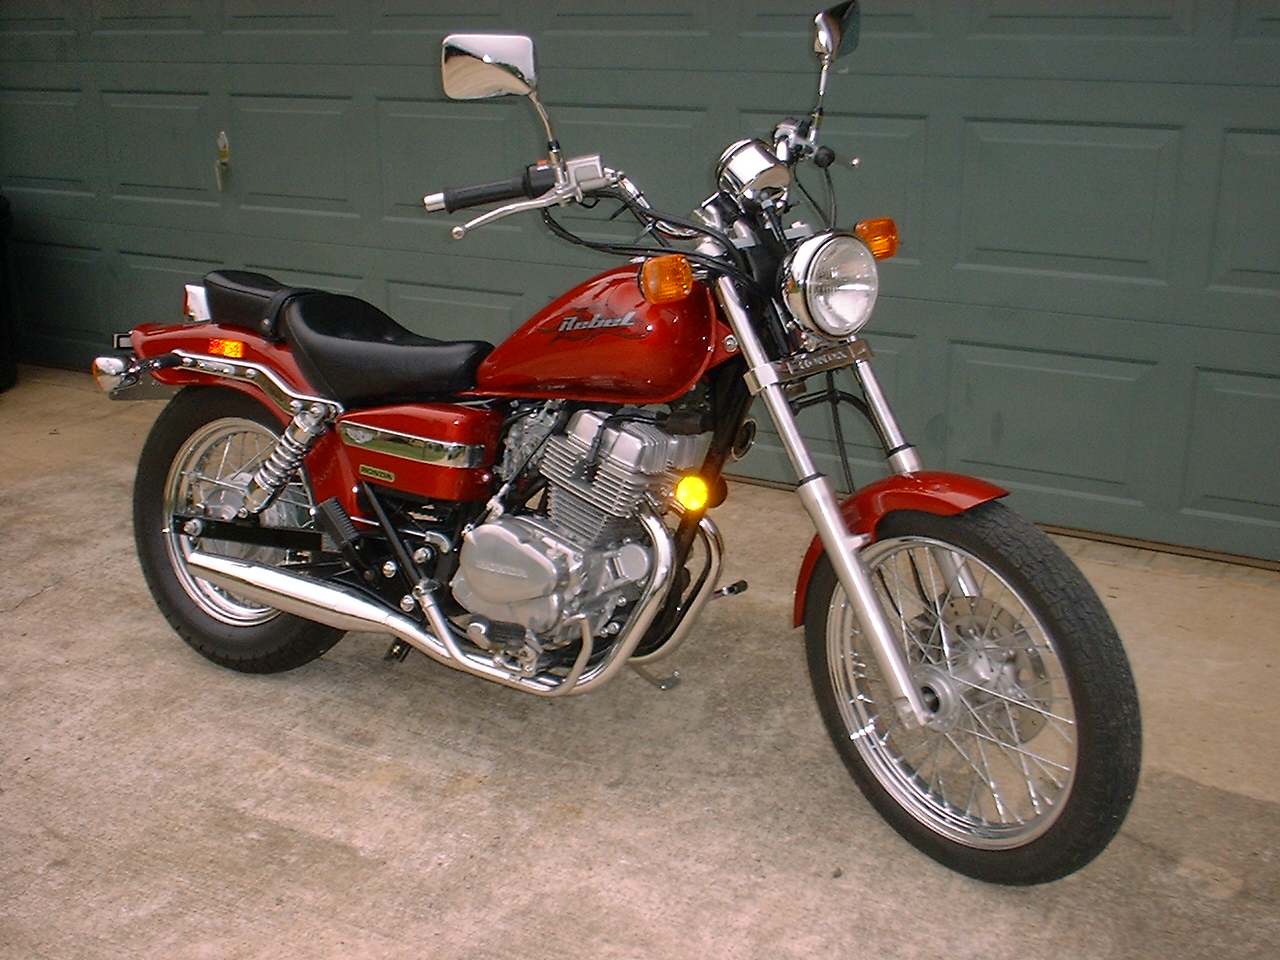 Forums / Classifieds / SOLD 2004 Honda Rebel 250 - 60 MPG - TAC and TVR